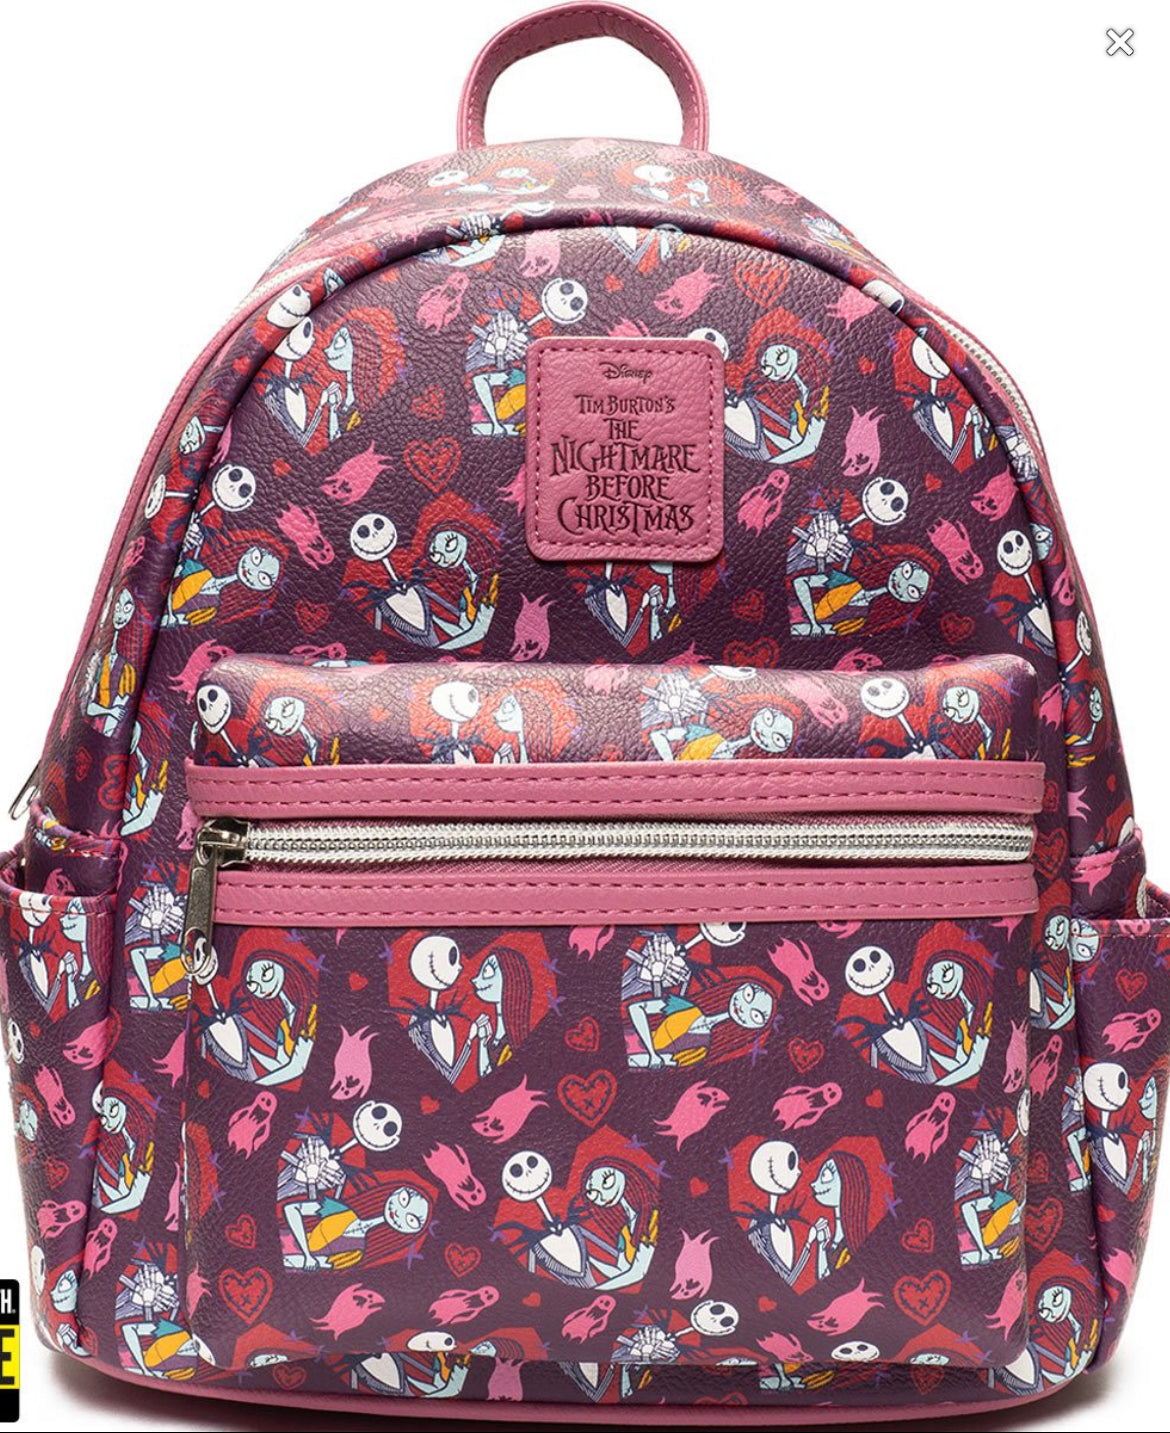 TNBC - Jack and Sally Hearts - Exclusive Mini Backpack by Loungefly